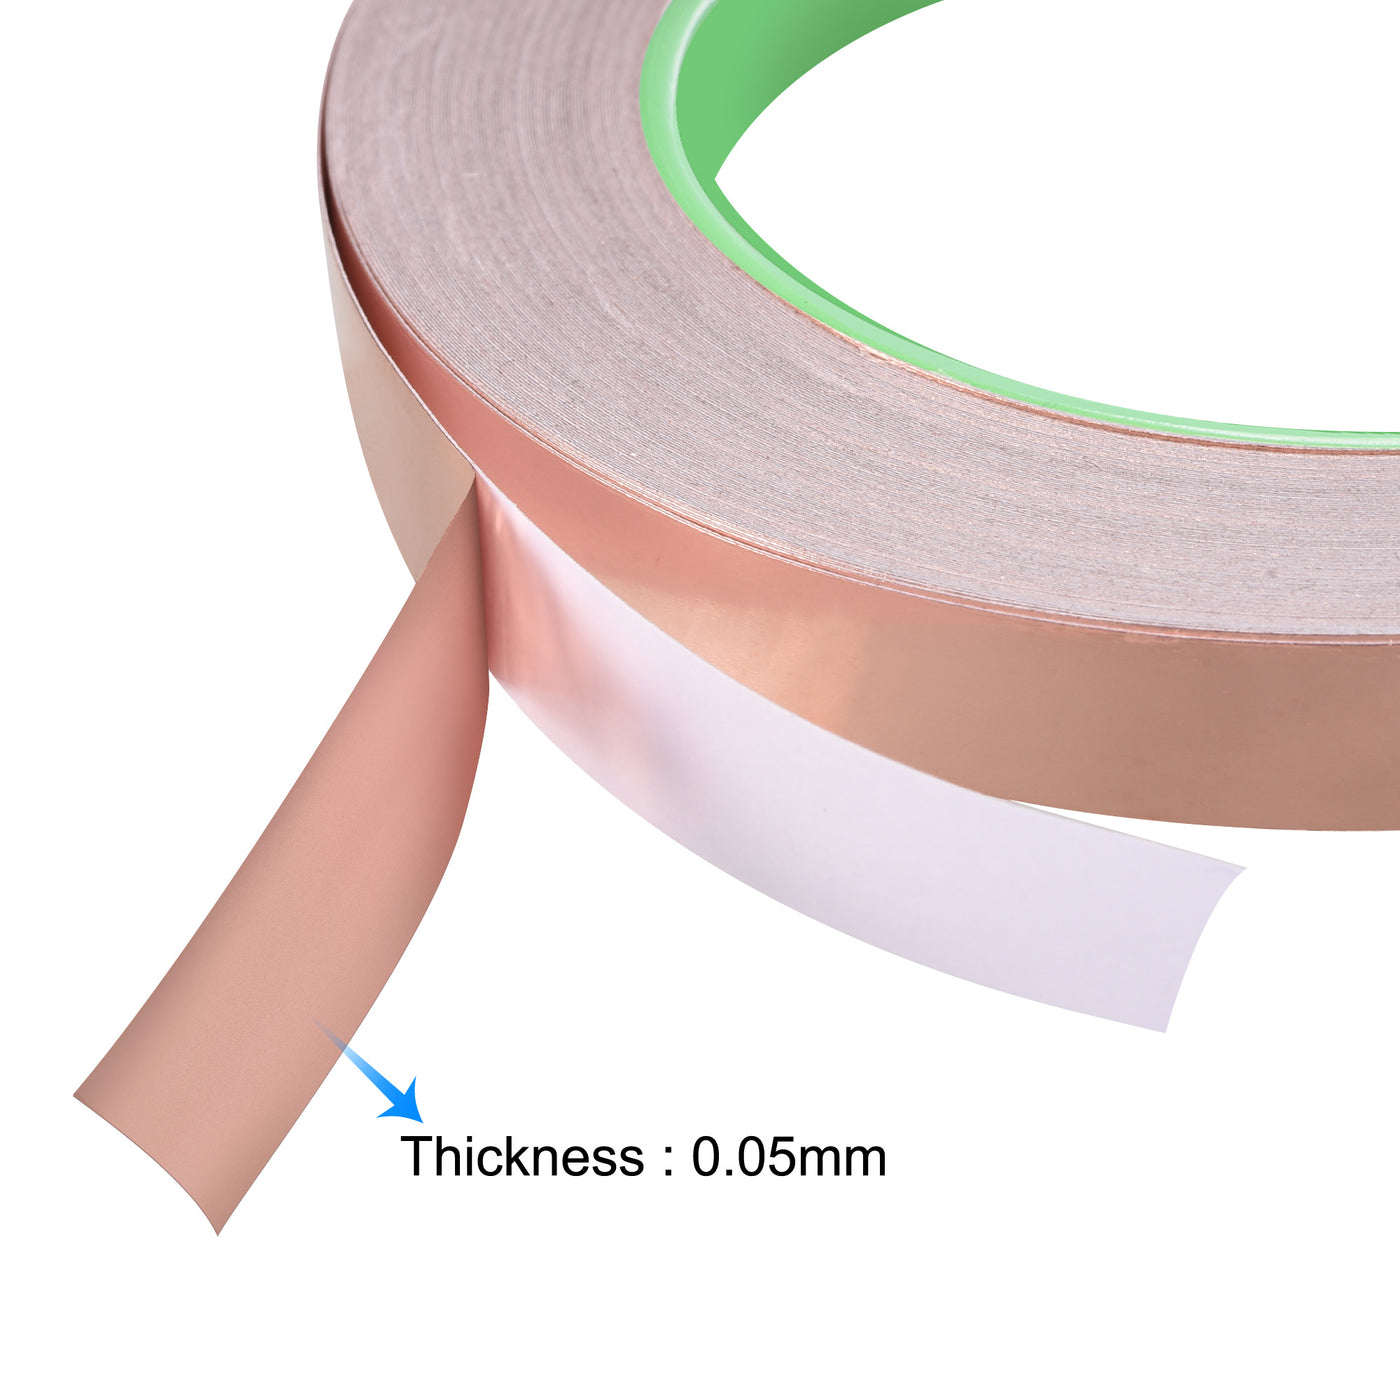 uxcell Uxcell Double-Sided Conductive Tape Copper Foil Tape 5mm x 30m/98.4ft 1pcs